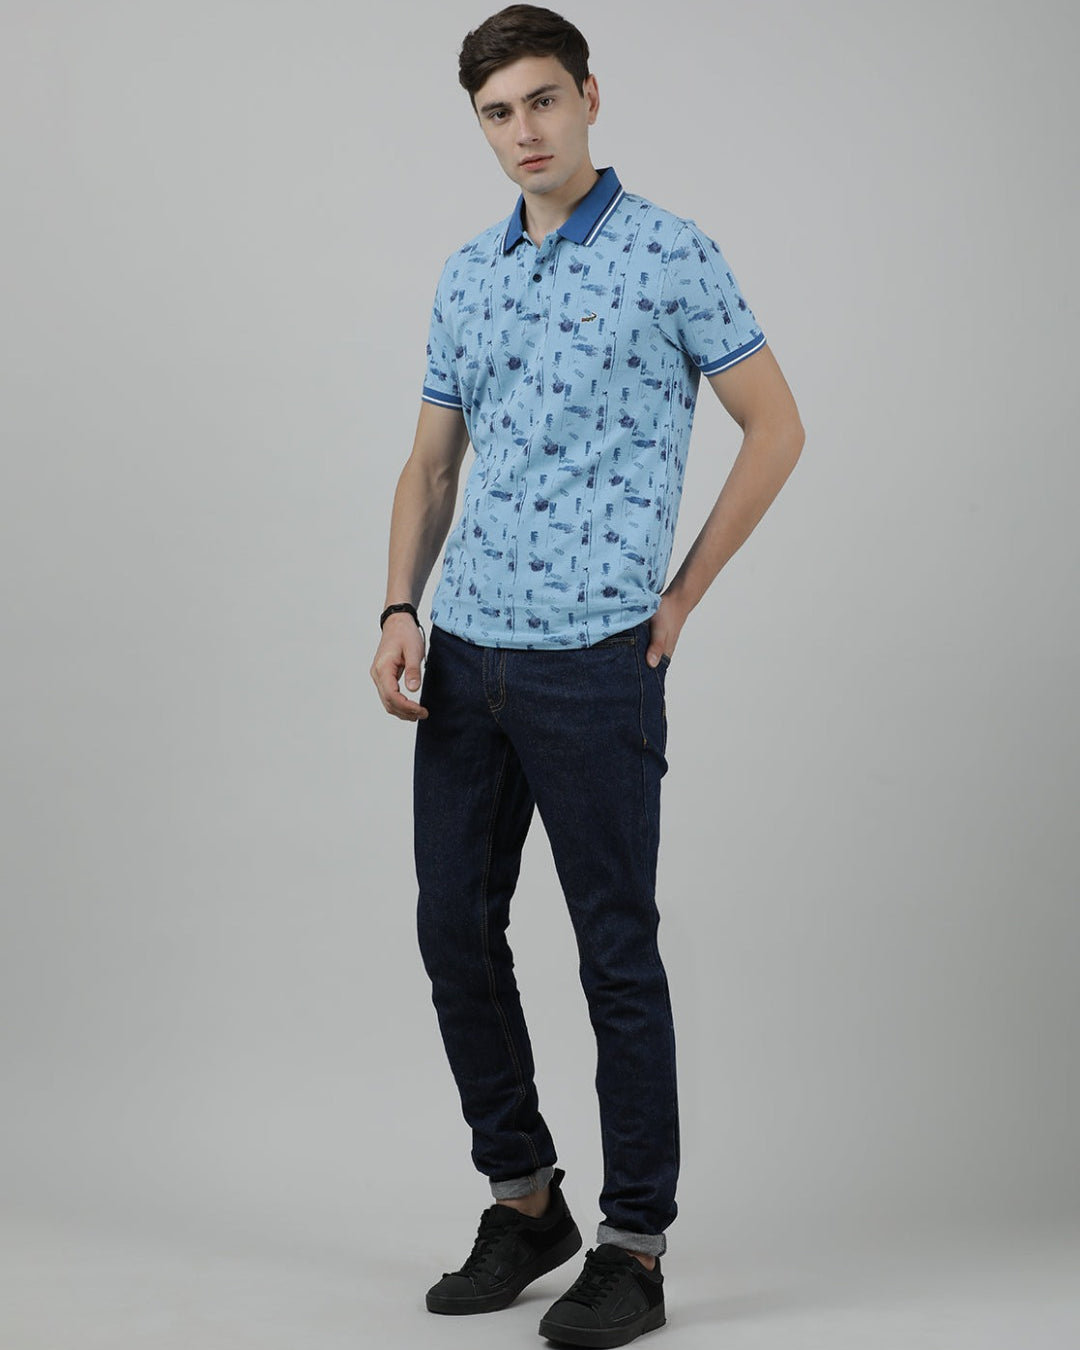 Crocodile Casual Light Blue T-Shirt Polo Printed Half Sleeve Slim Fit with Collar for Men